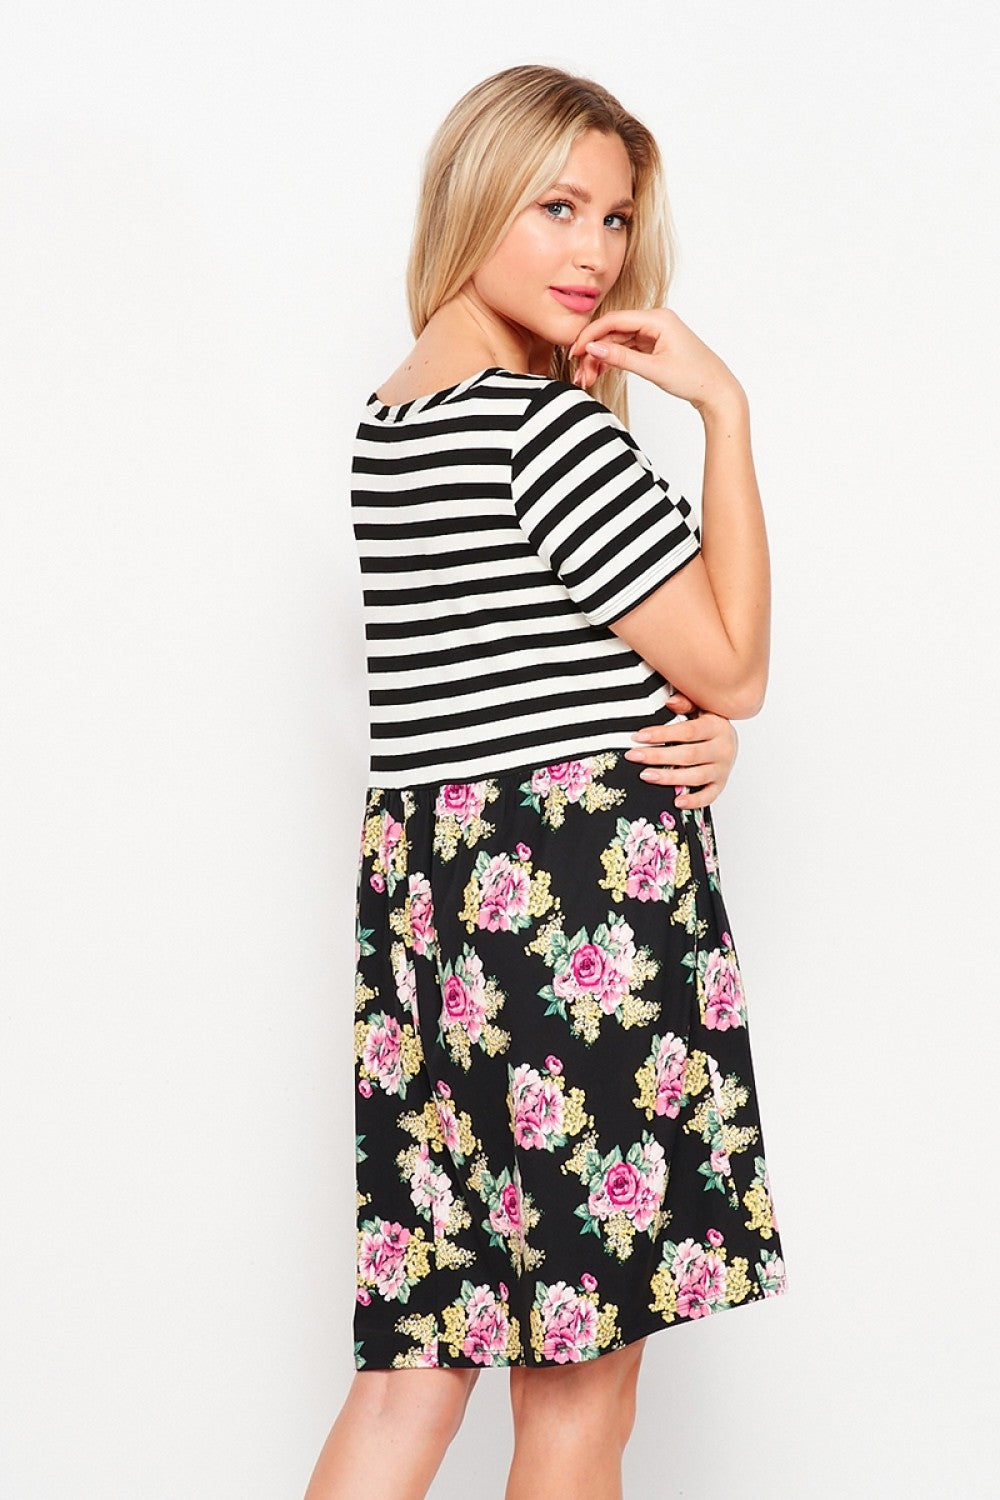 Short Sleeve Stripe and Floral Dress